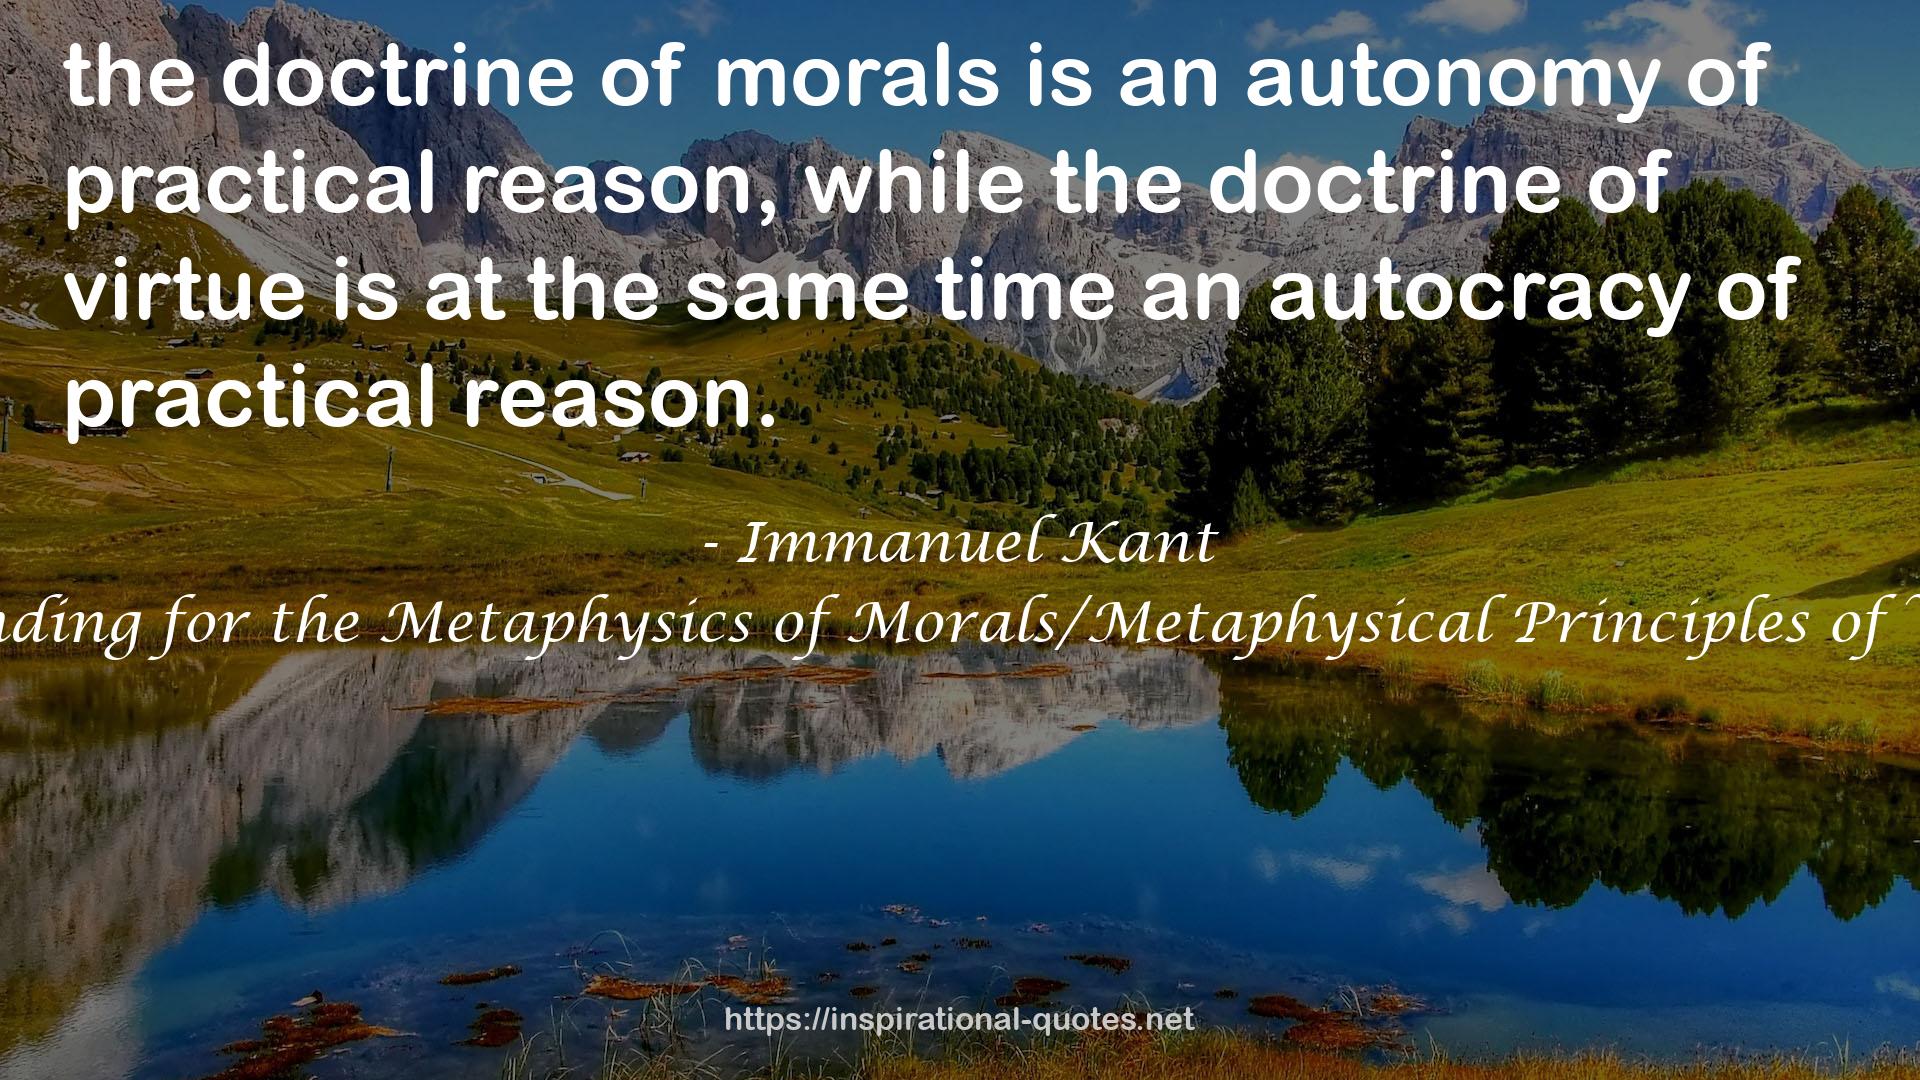 Grounding for the Metaphysics of Morals/Metaphysical Principles of Virtue QUOTES